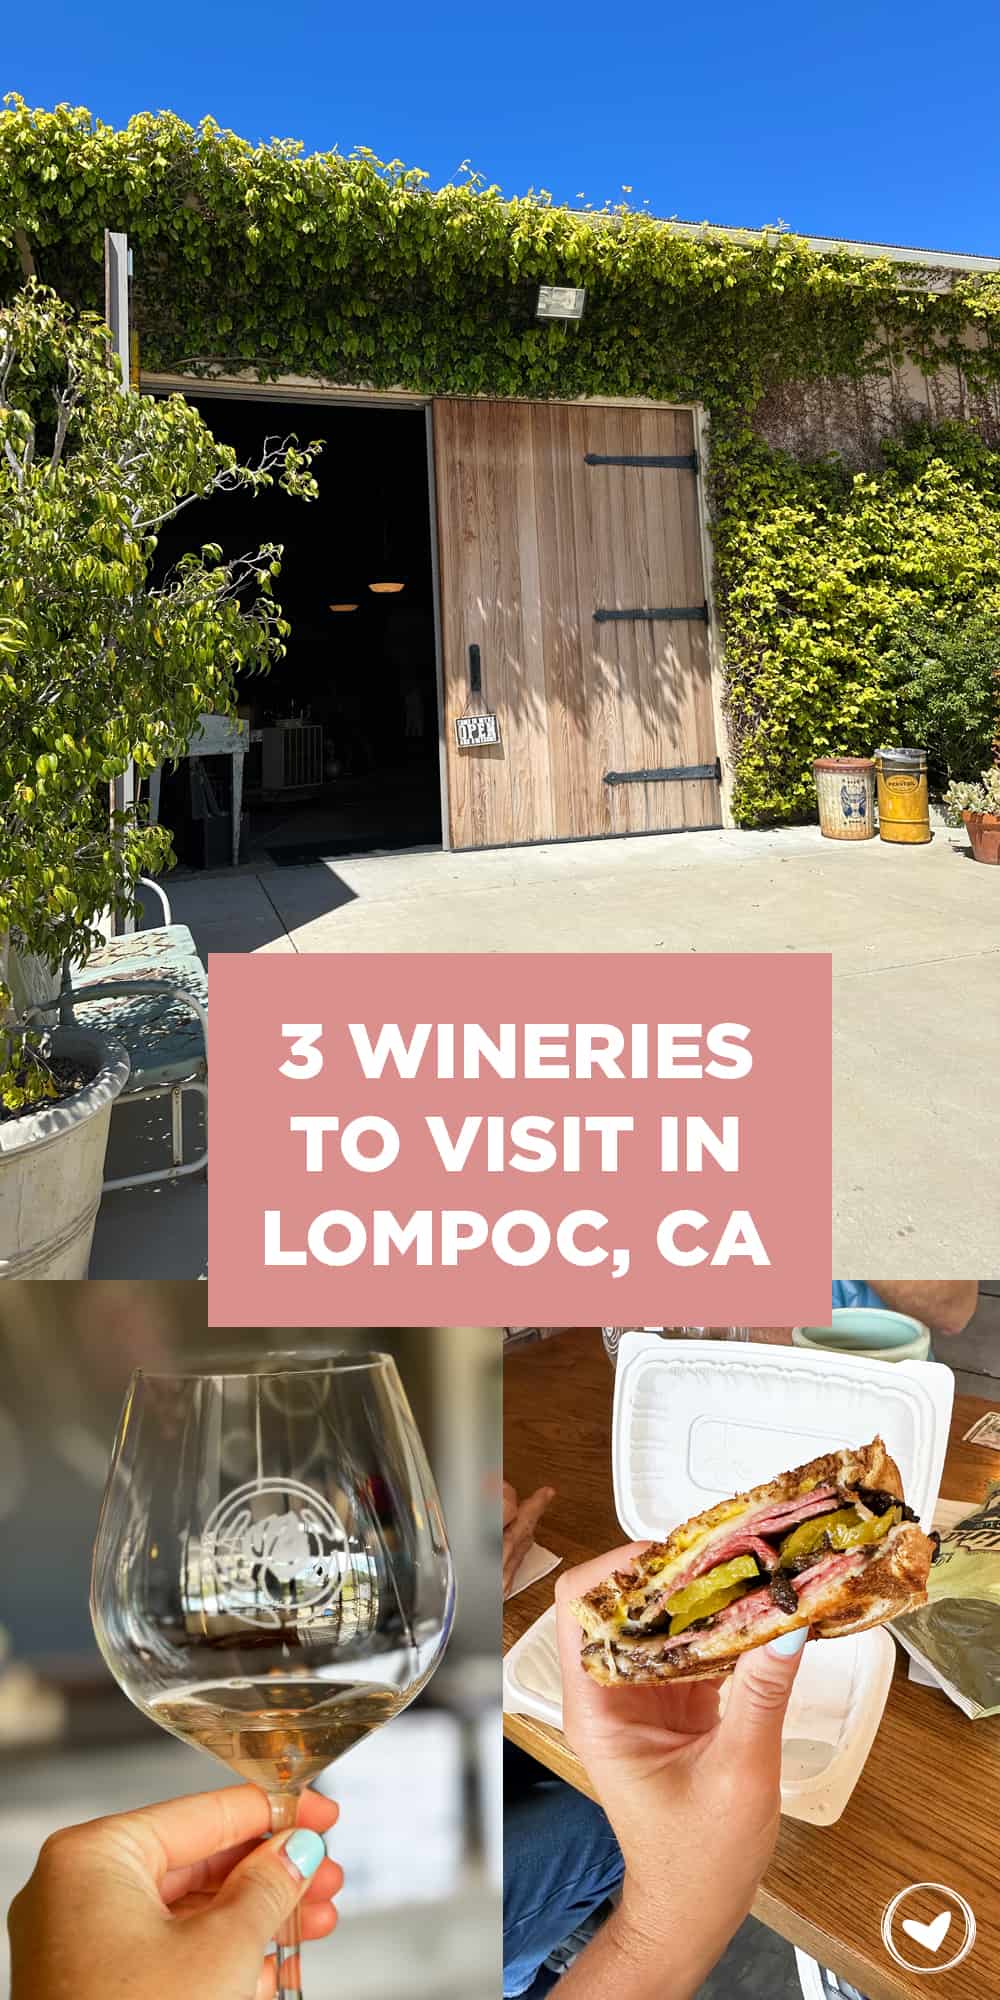 3 Wineries to Visit in Lompoc, CA